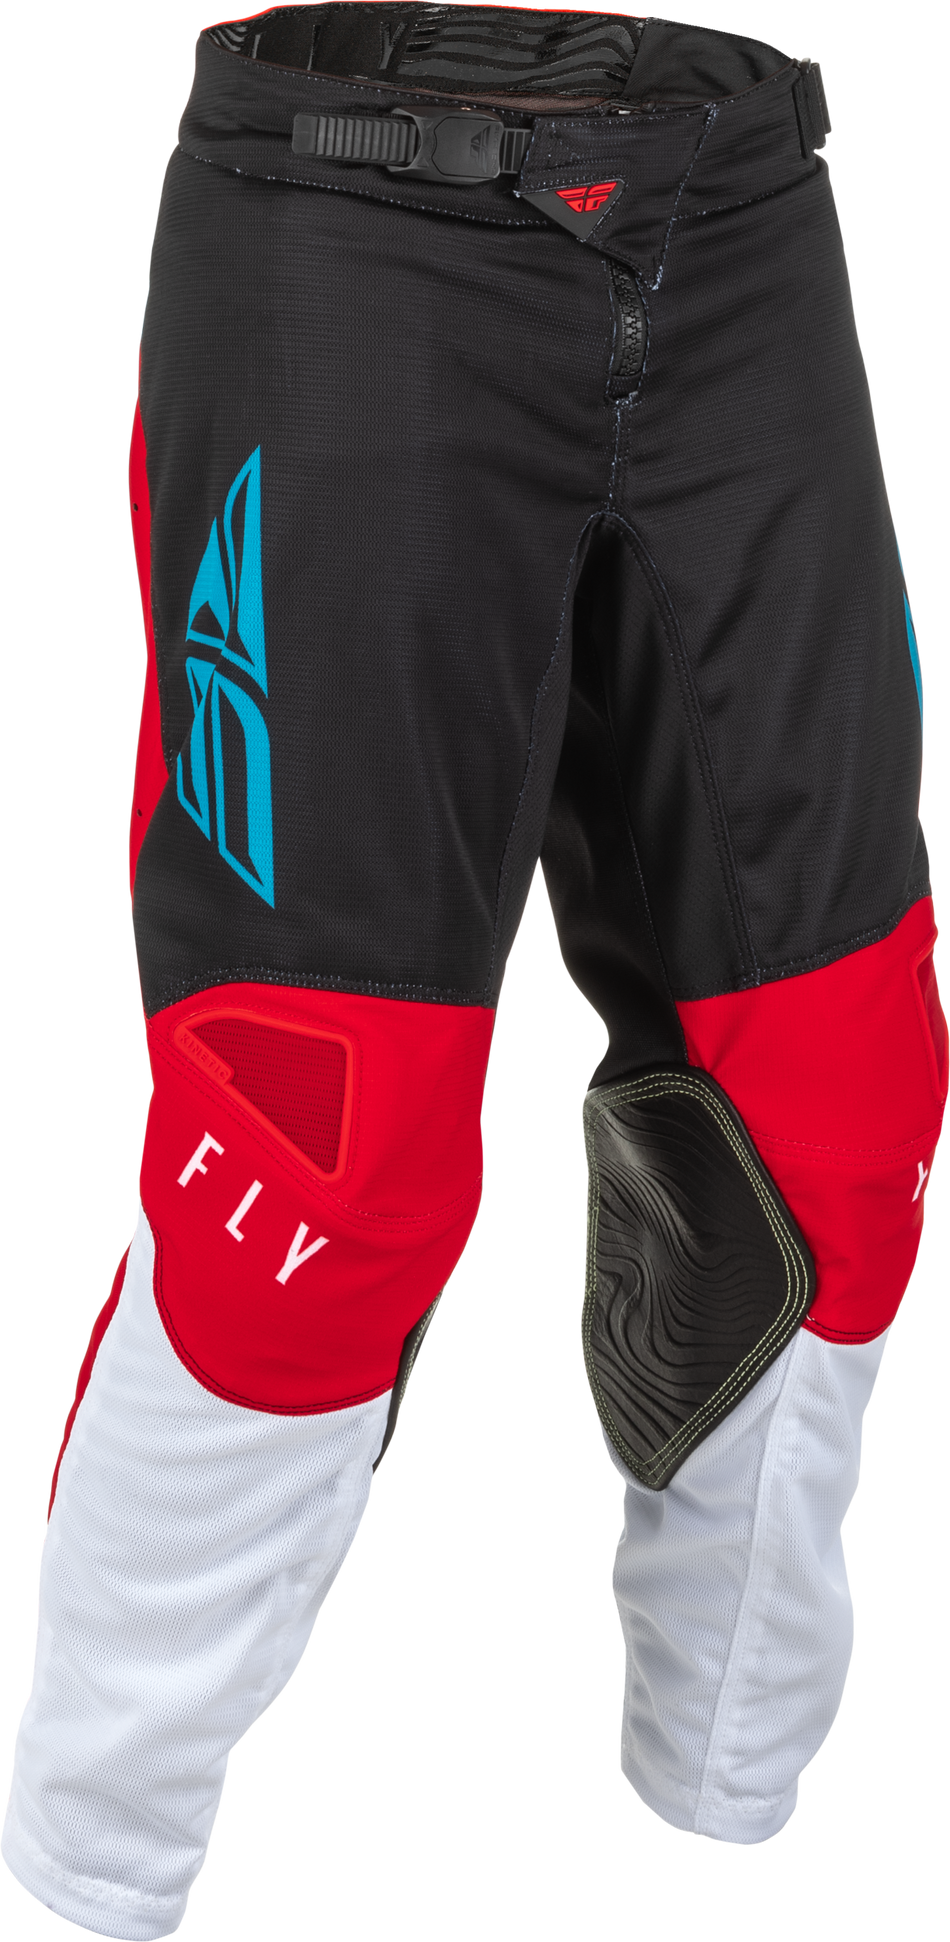 FLY RACING Youth Kinetic Mesh Pants Red/White/Blue Sz 24 375-32424